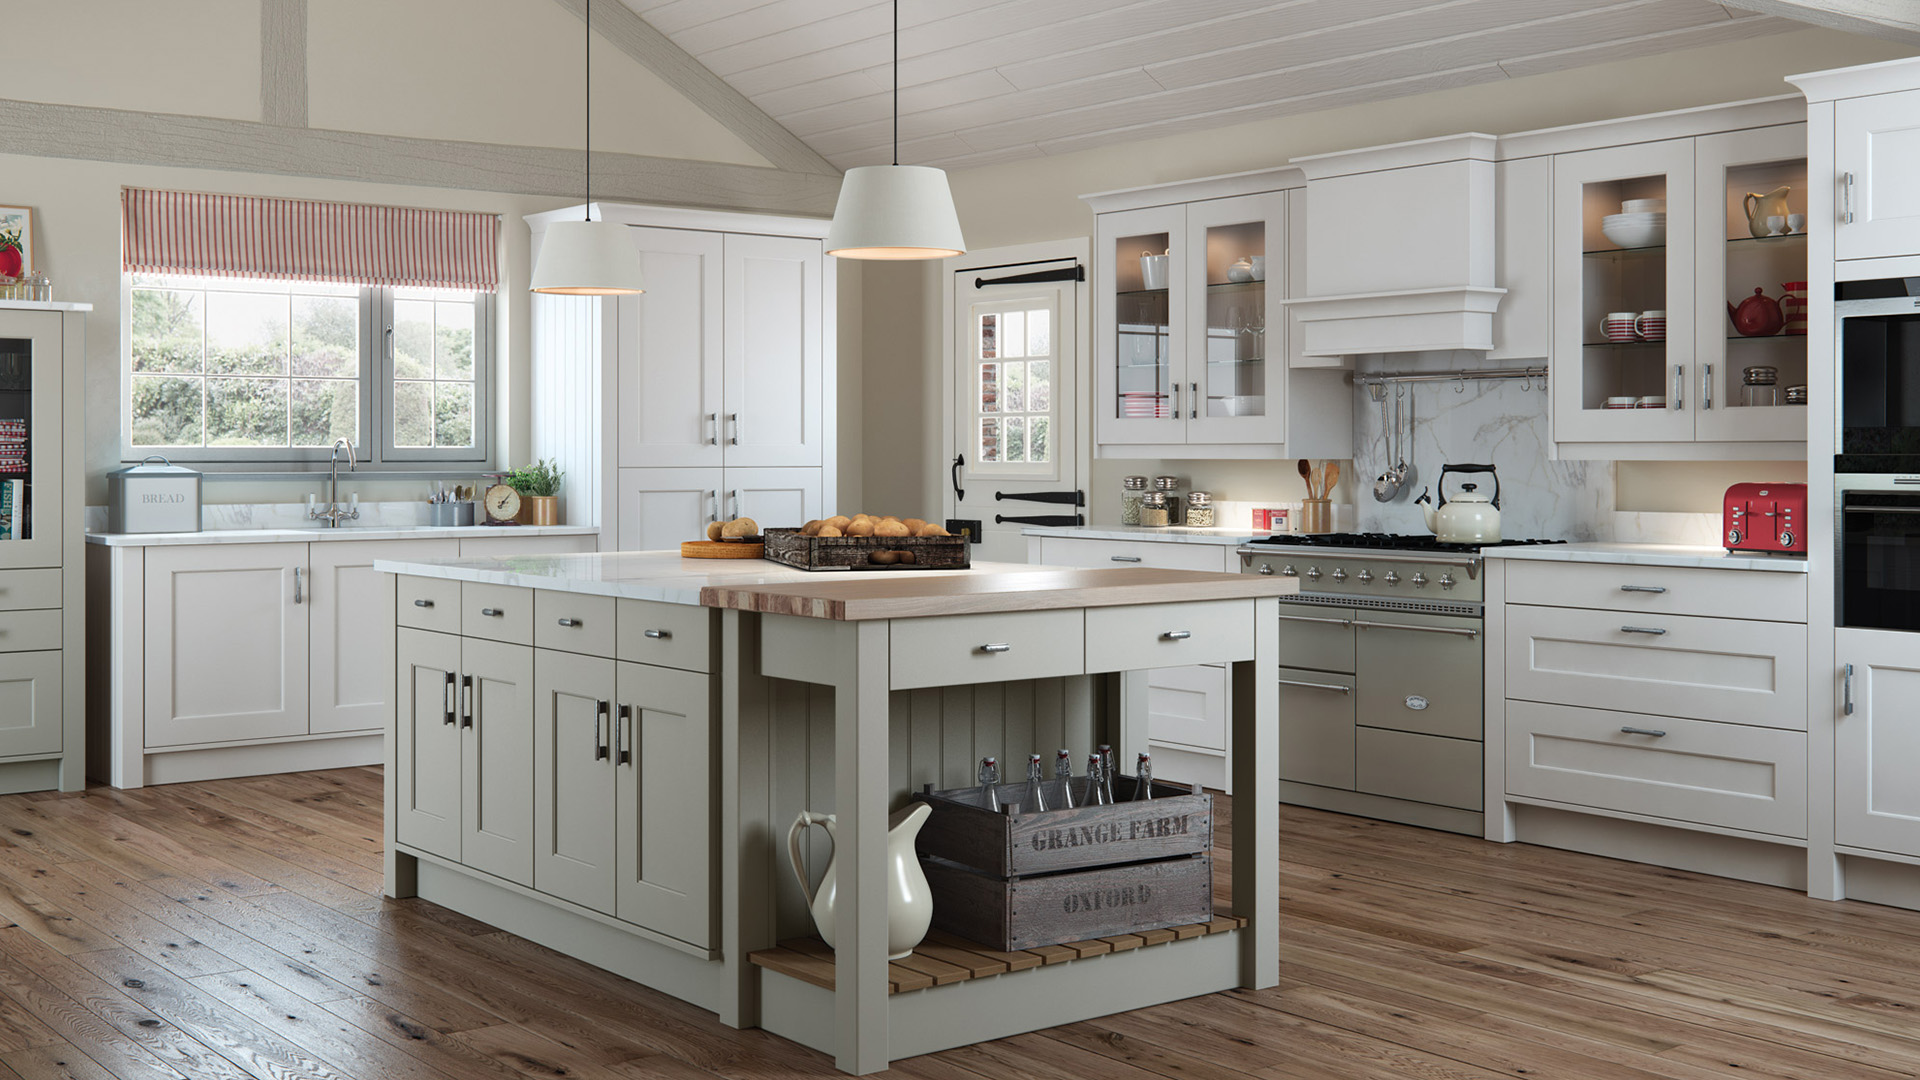 Florence stone smooth shaker kitchens blending shaker simplicity with the elegance of smooth stone